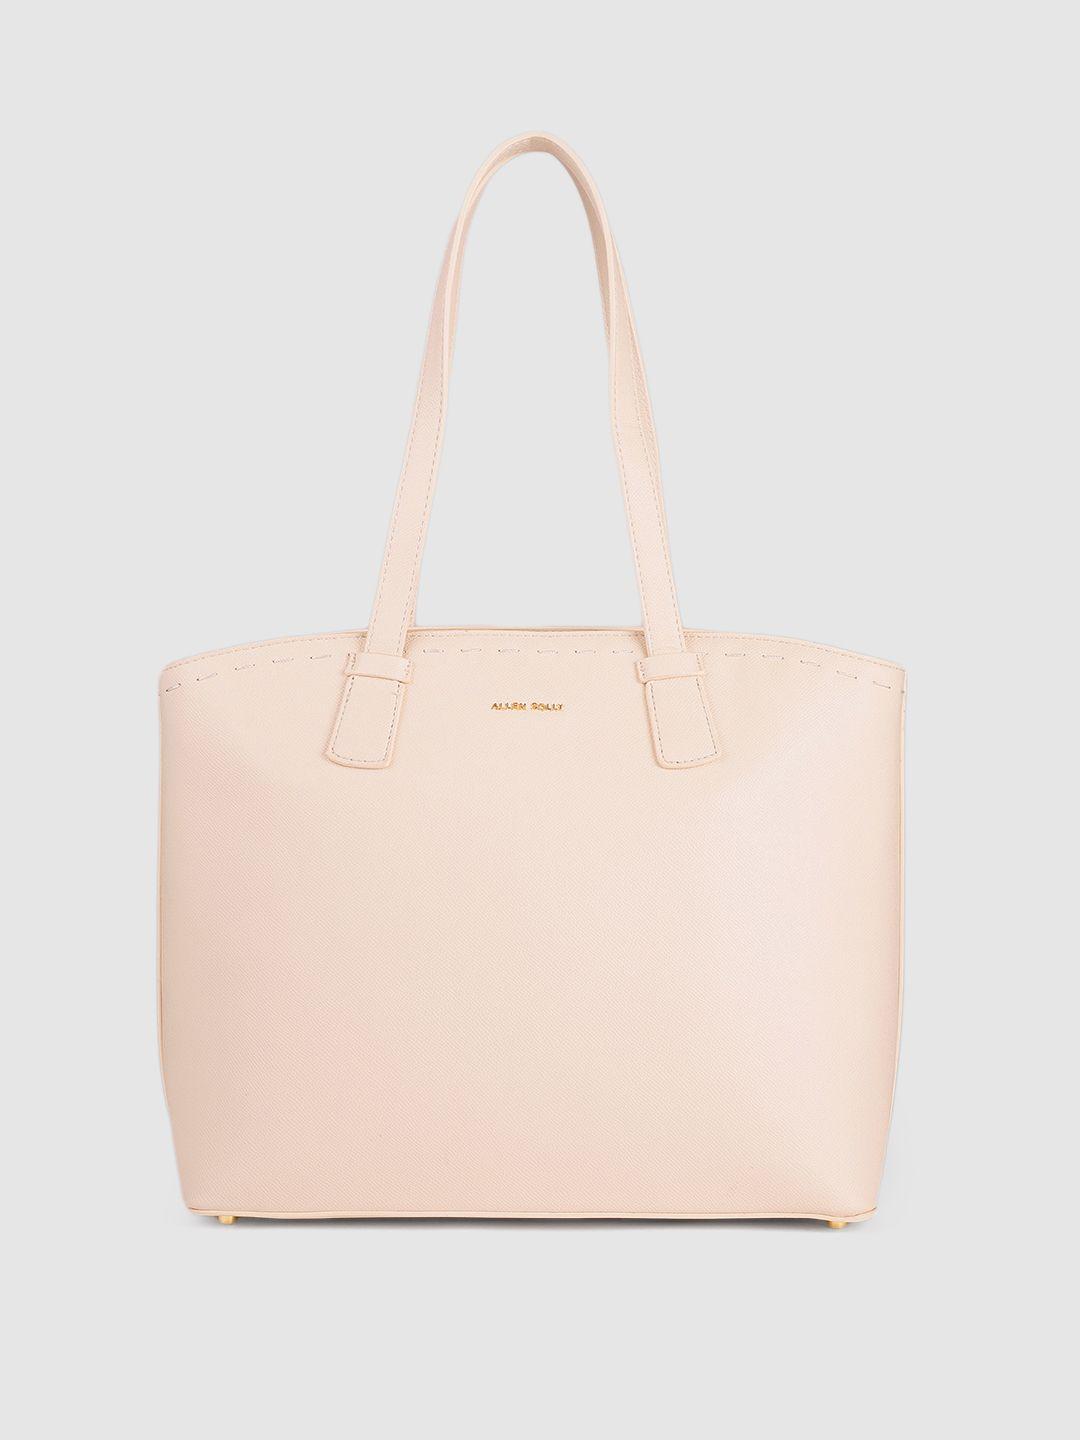 allen solly nude-coloured solid structured handheld bag